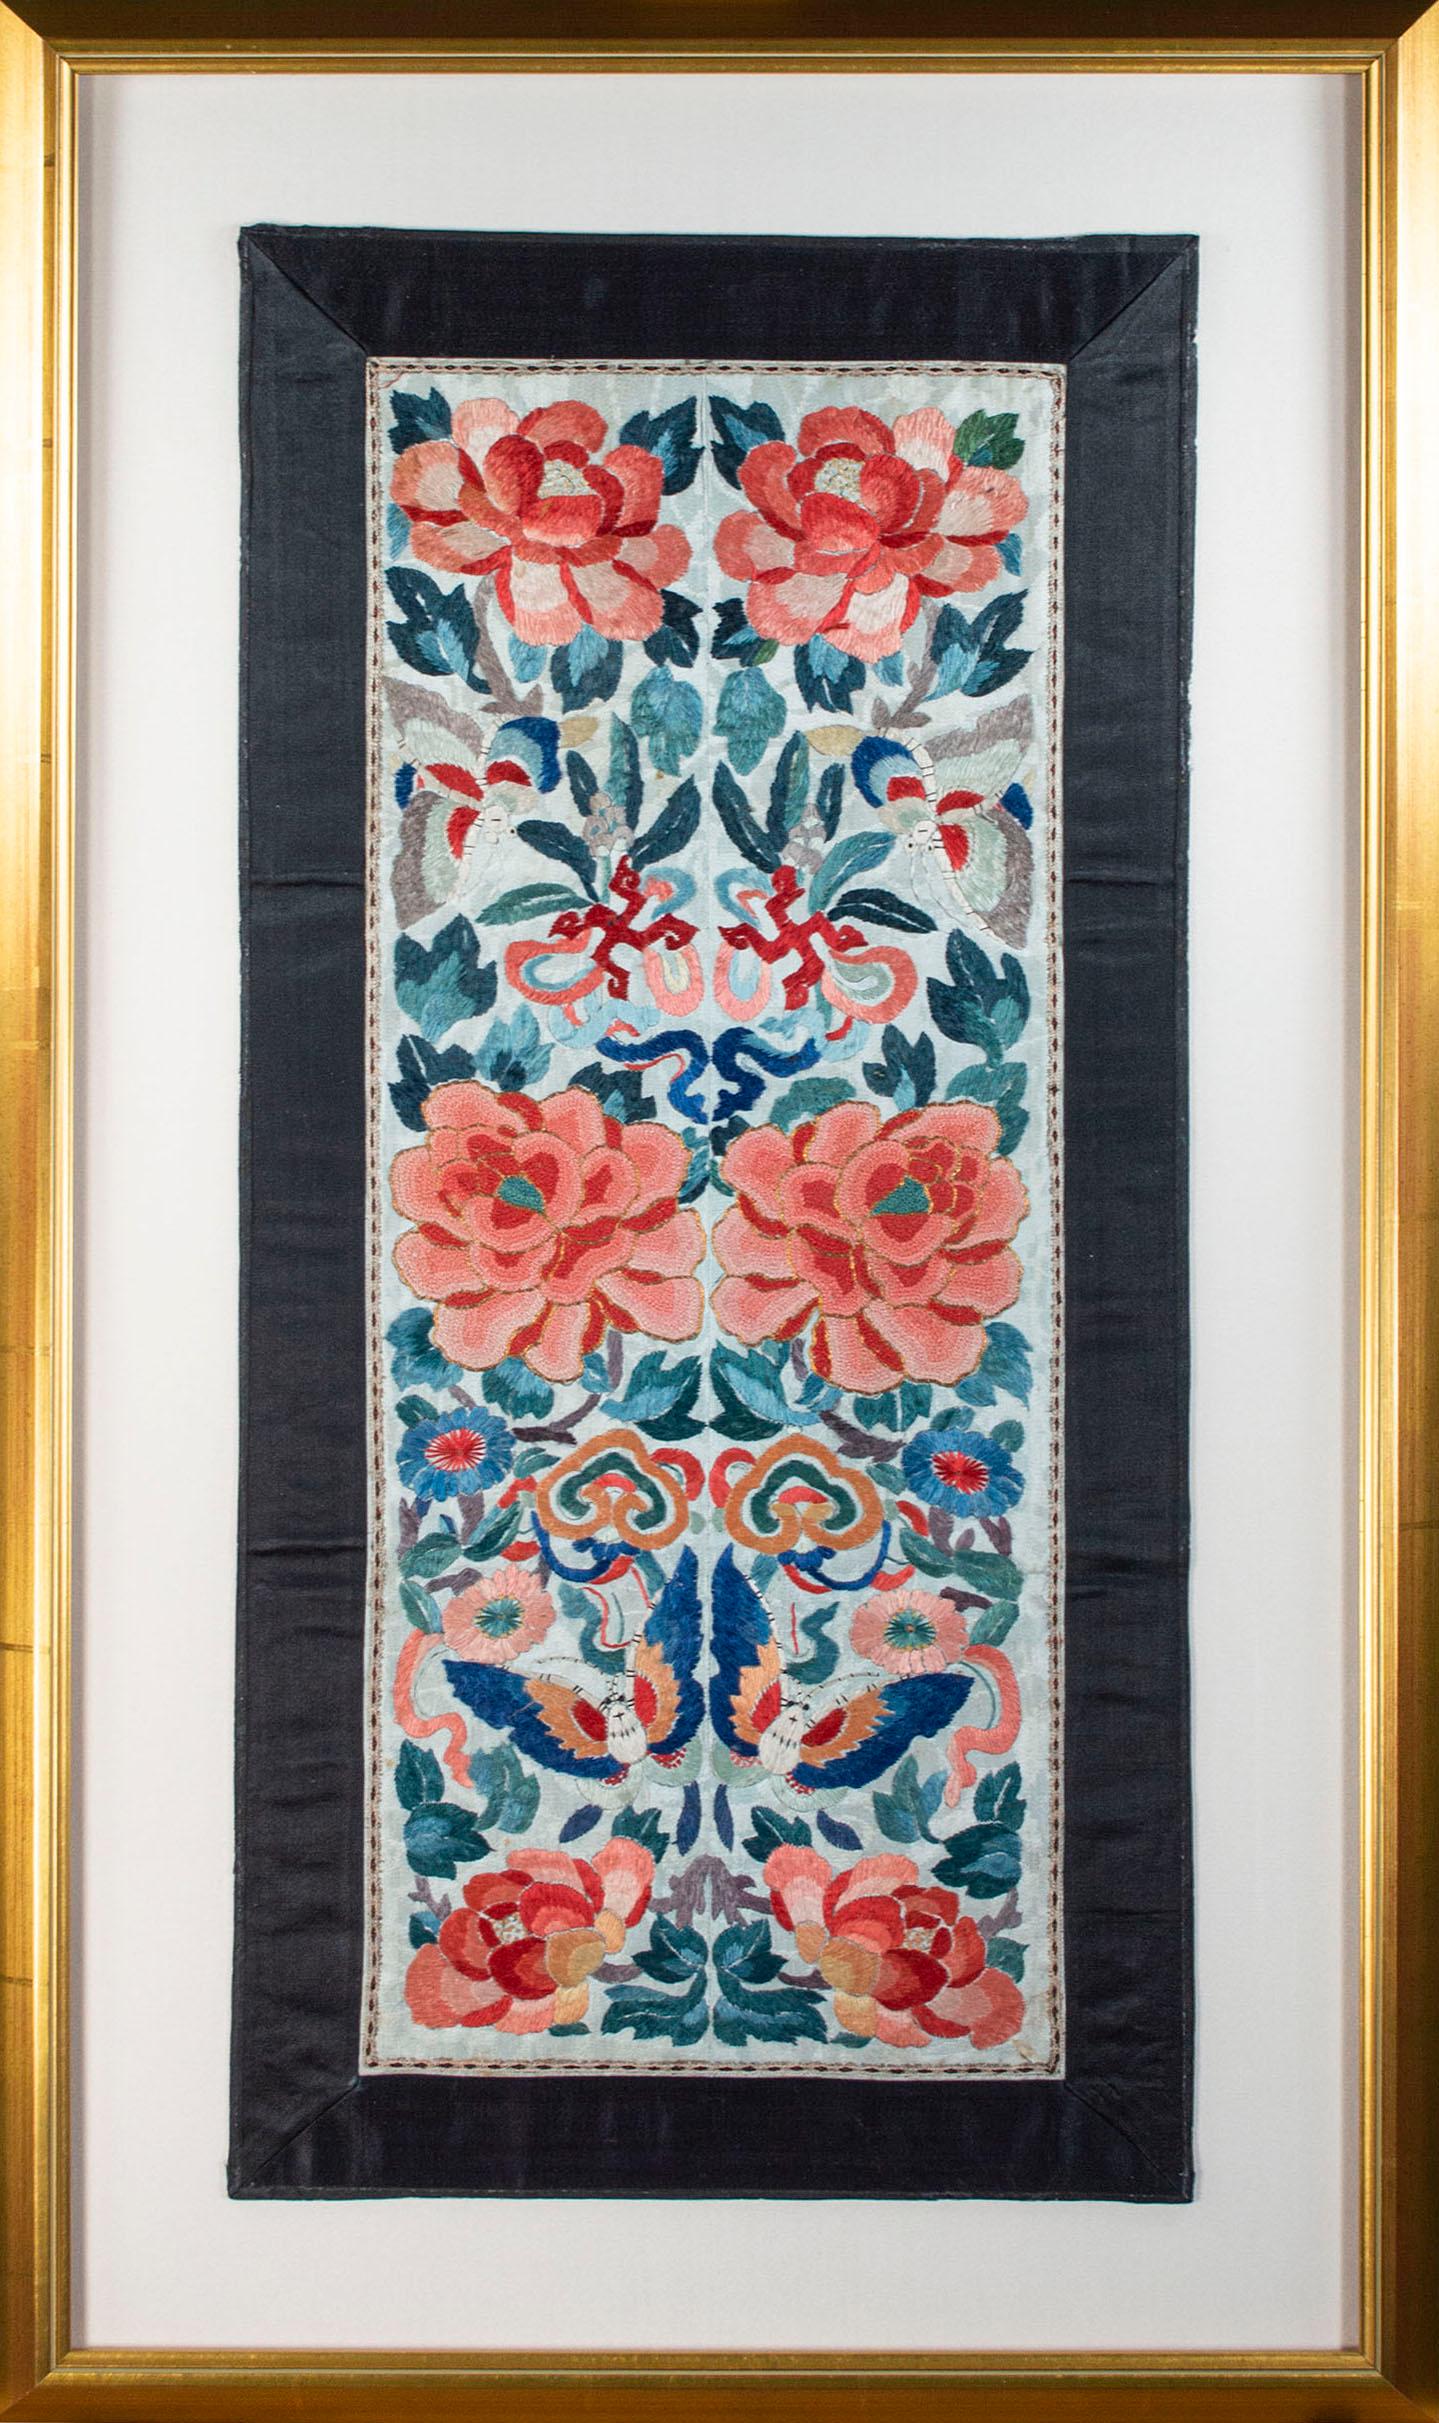 "Chinese Silk Textile, " Silk Flowery Embroidery created in the 19th Century